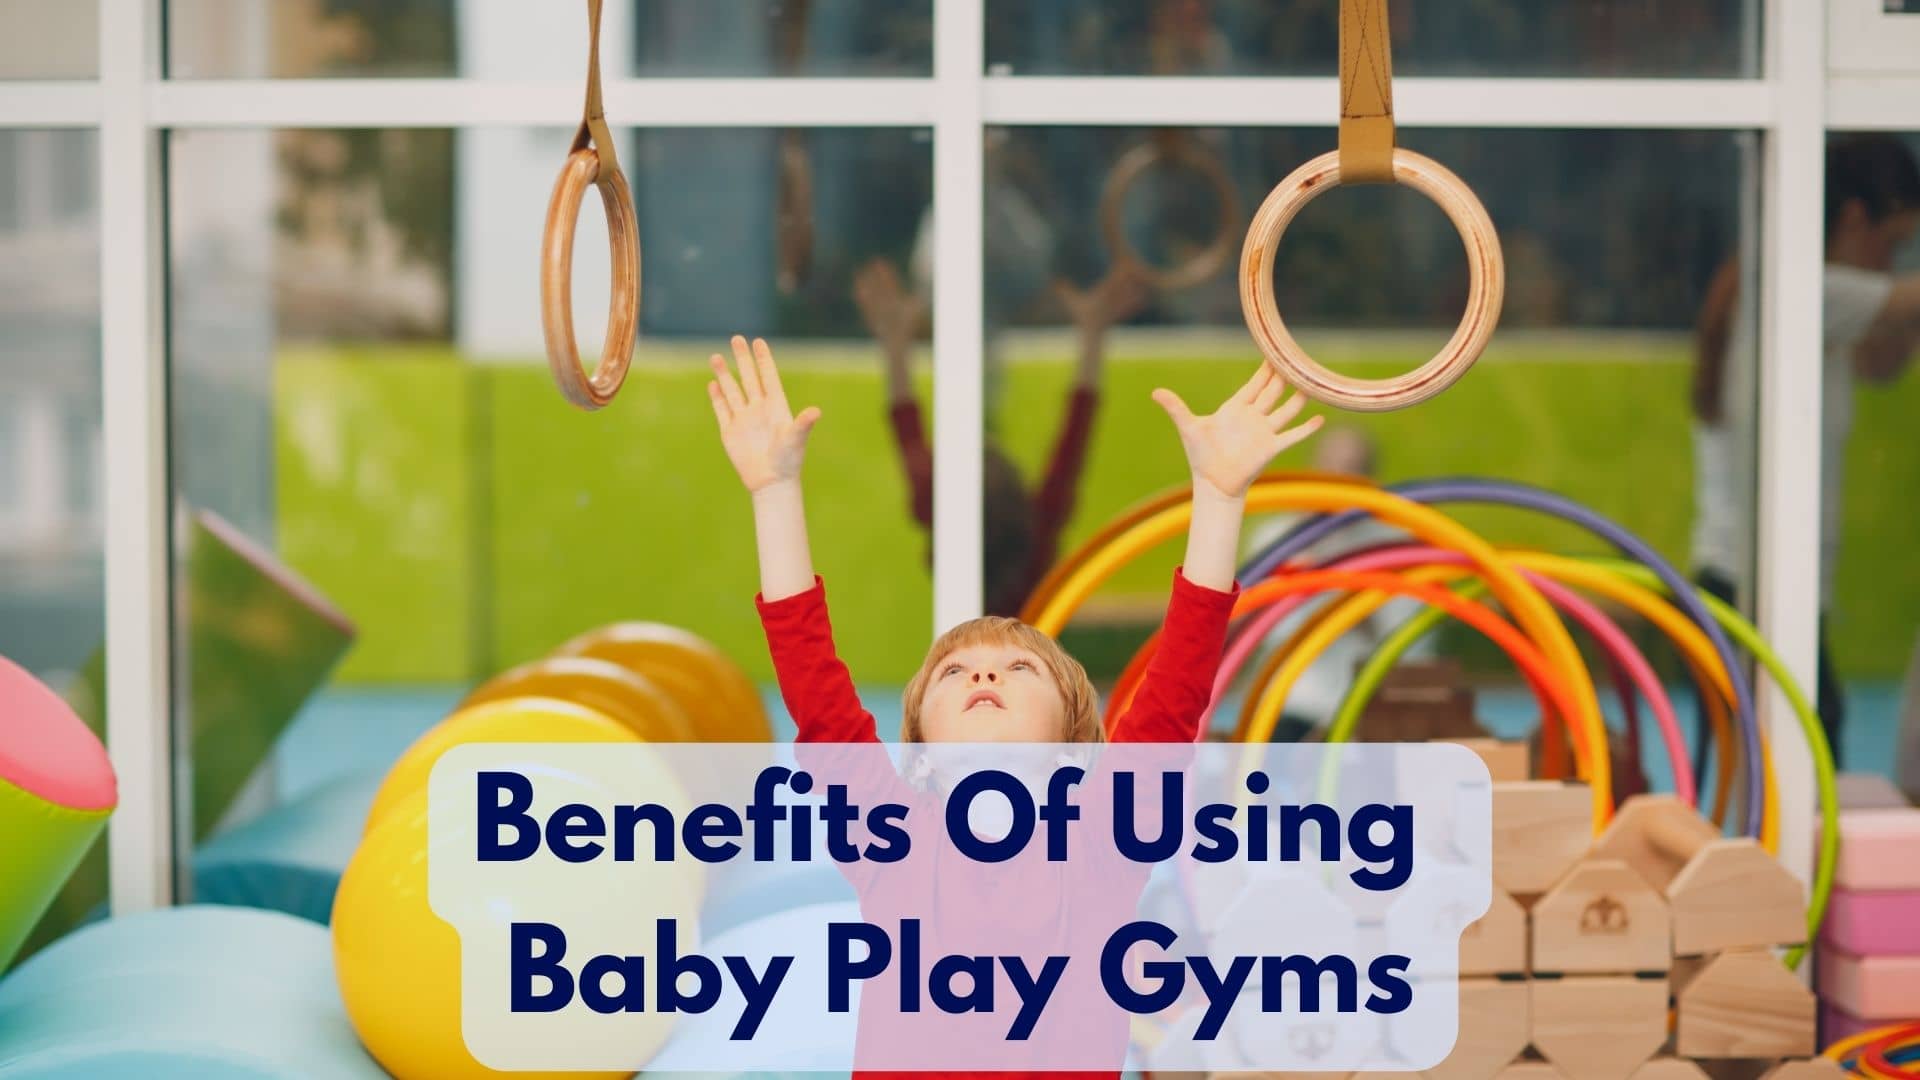 What Are Some Baby Play Mat Benefits?